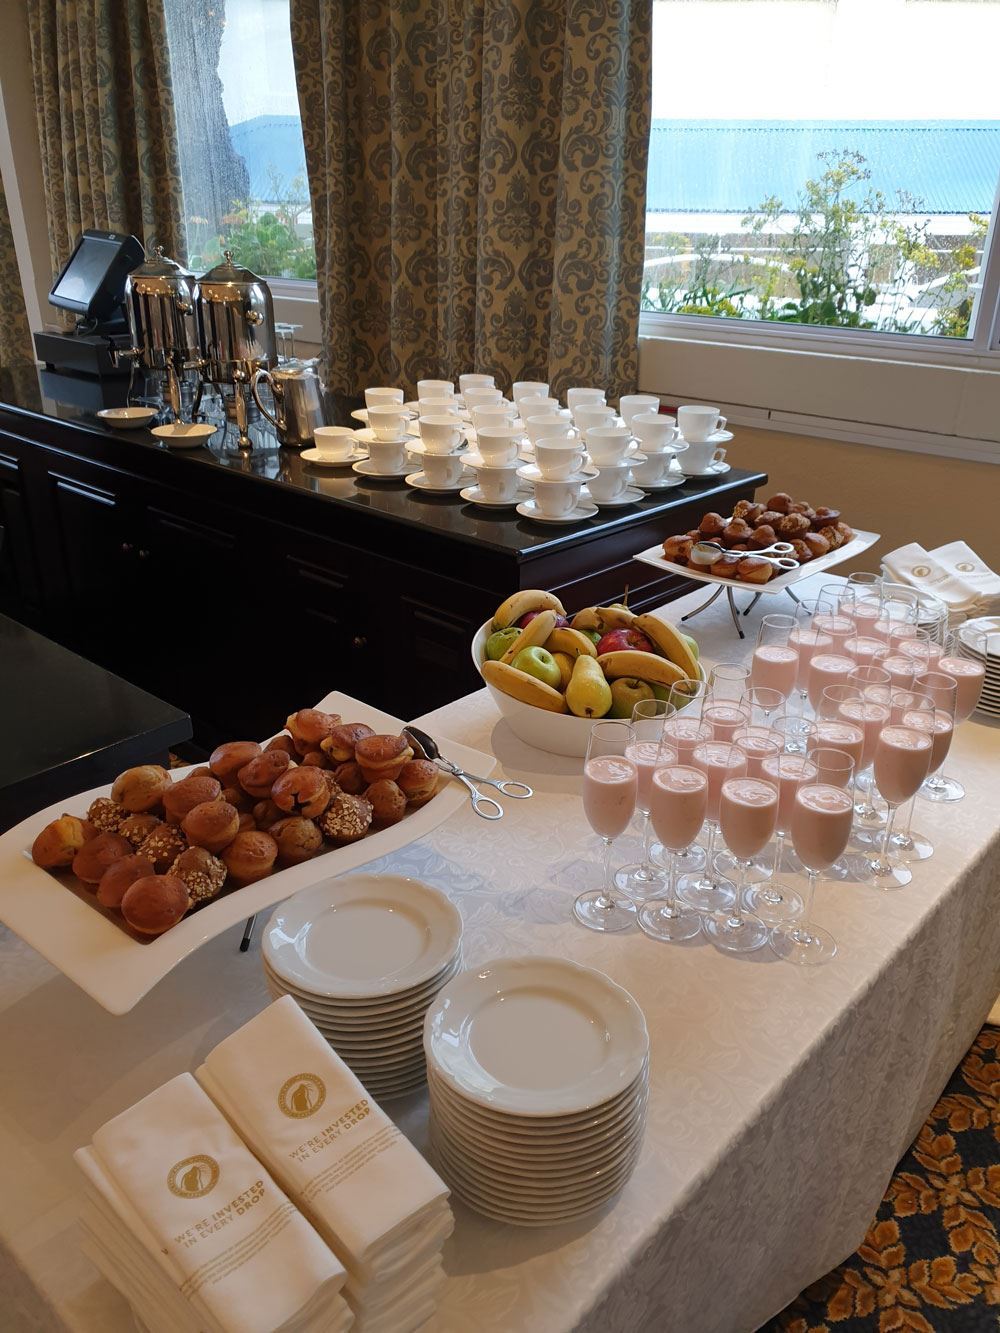 Food and drinks displayed for conference.